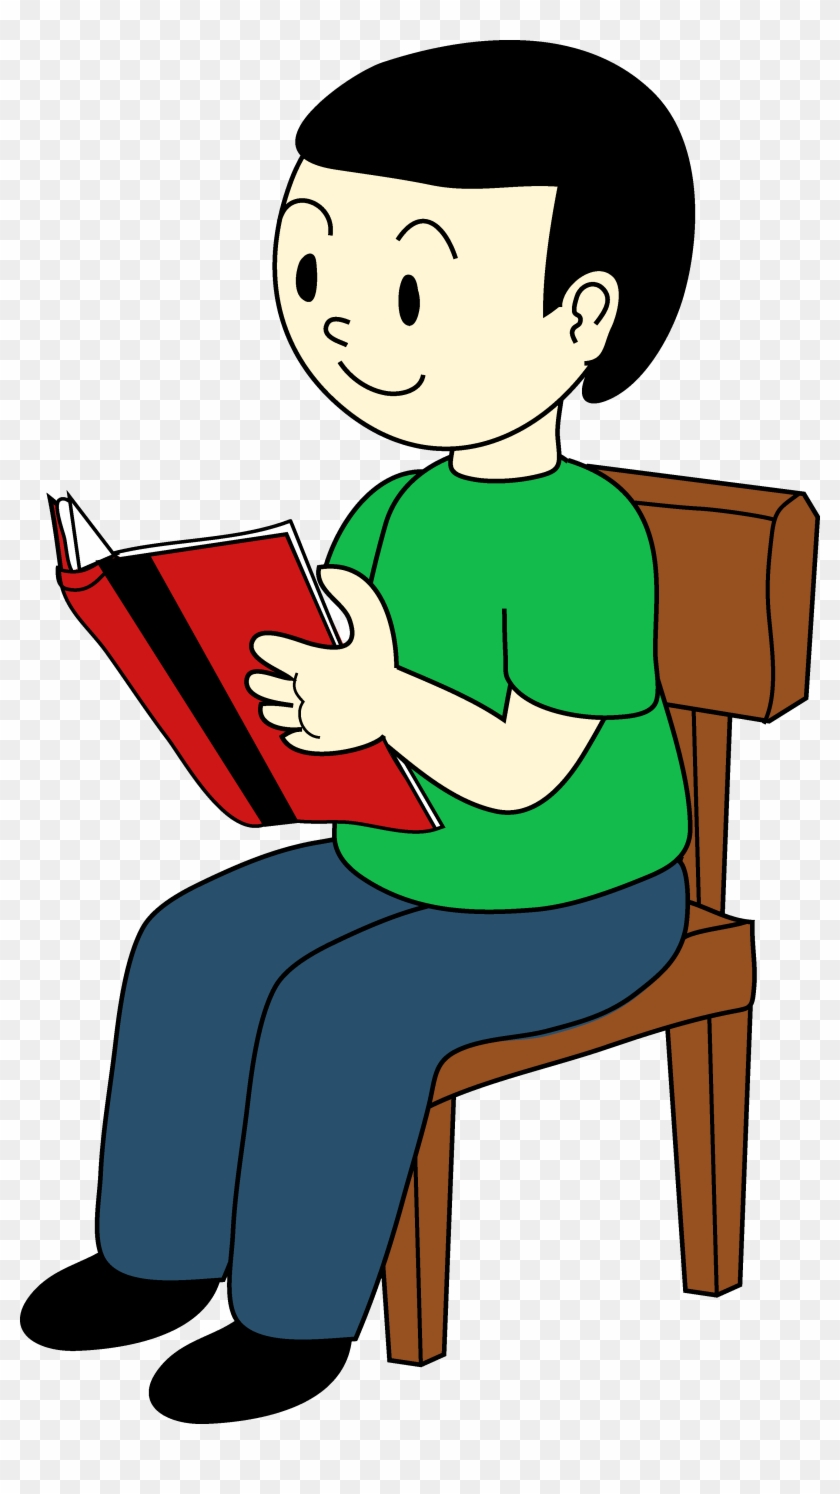 Sit Clipart - Sat On A Chair #1008152